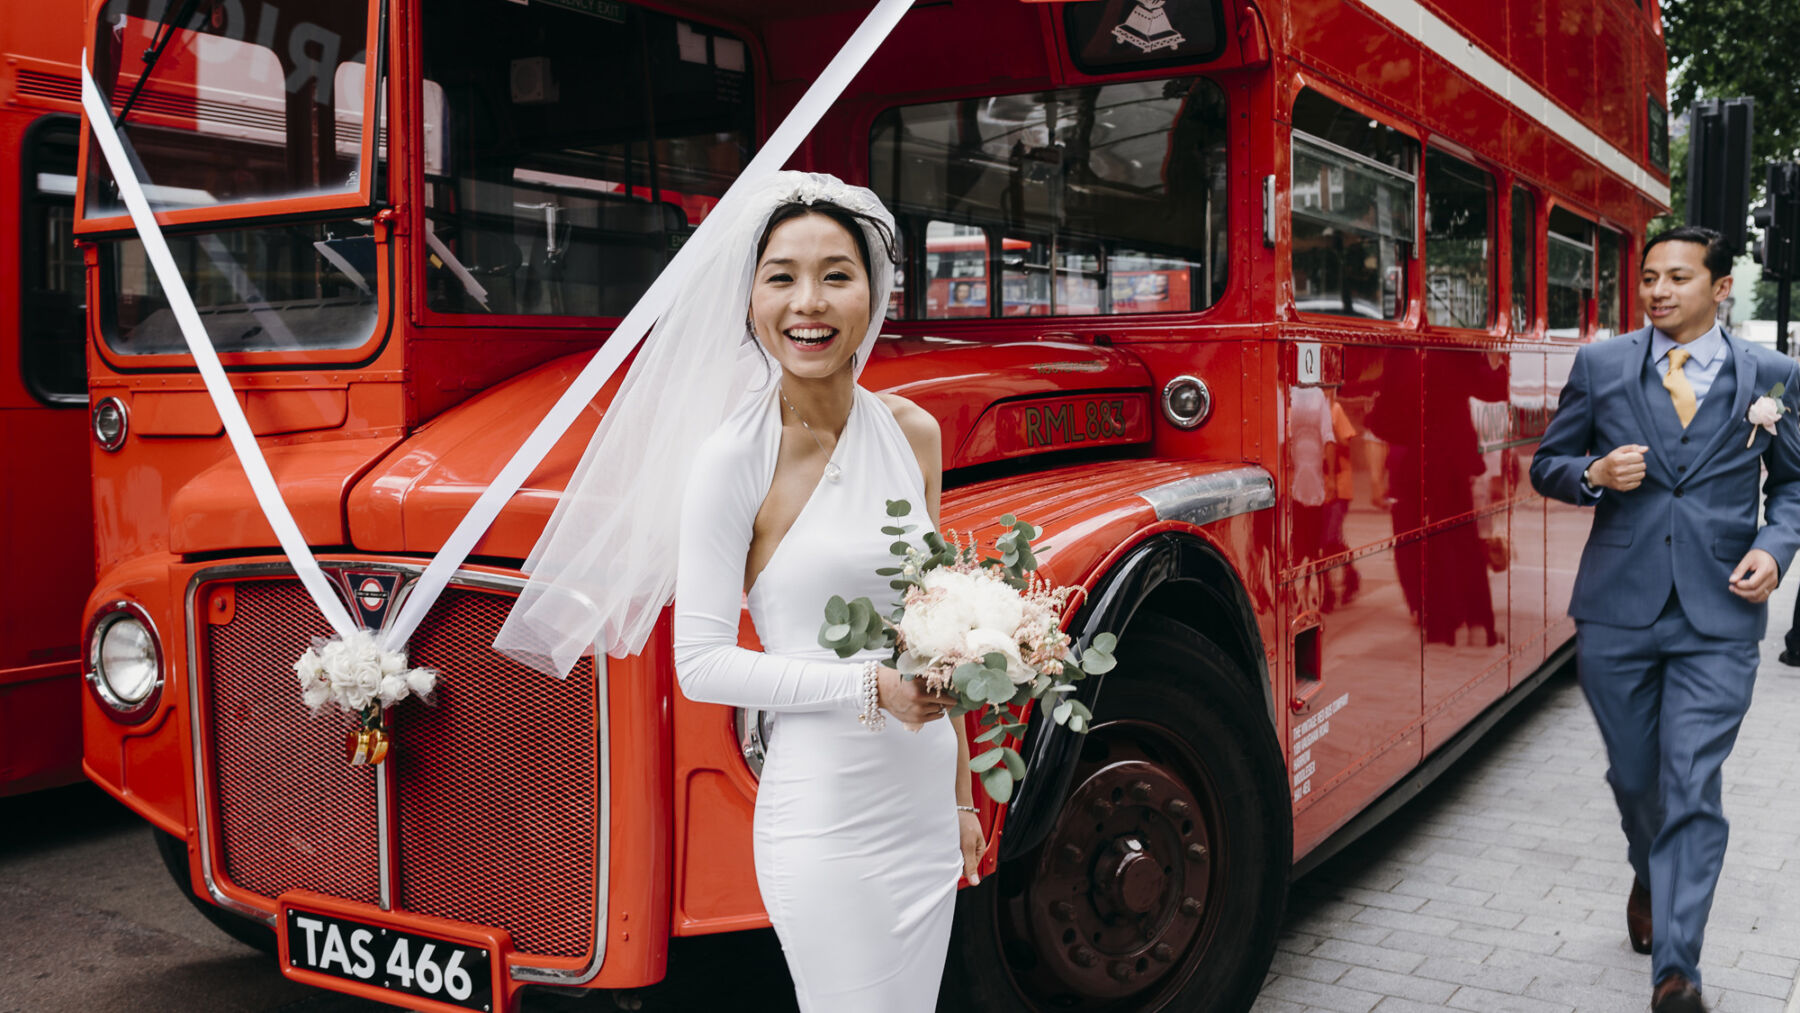 Chinese bride in one shoulder wedding dress standing next to red London bus. Sandra Reddin Photography: London wedding photographer